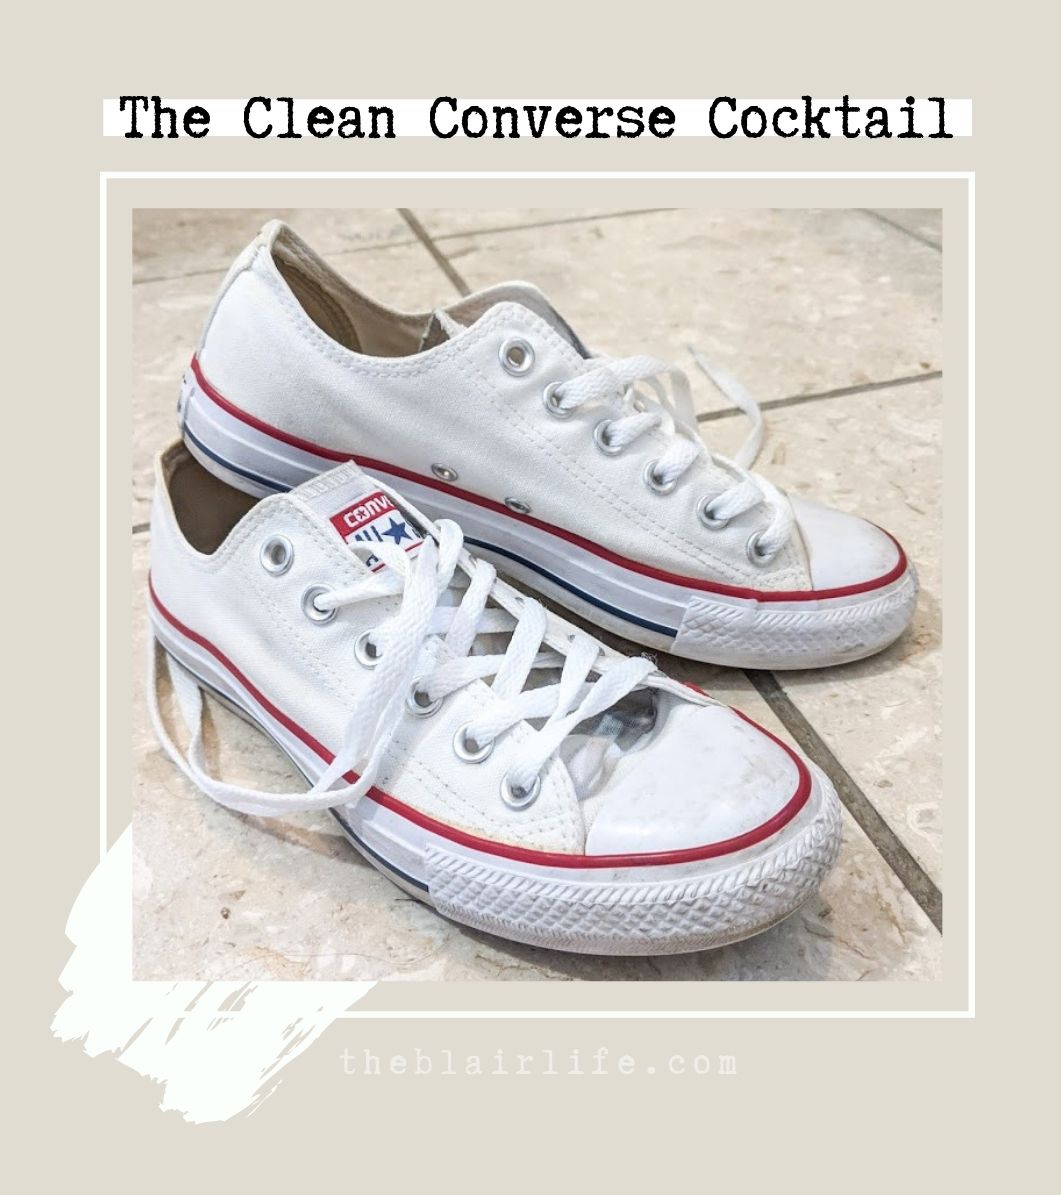 How to Clean Converse